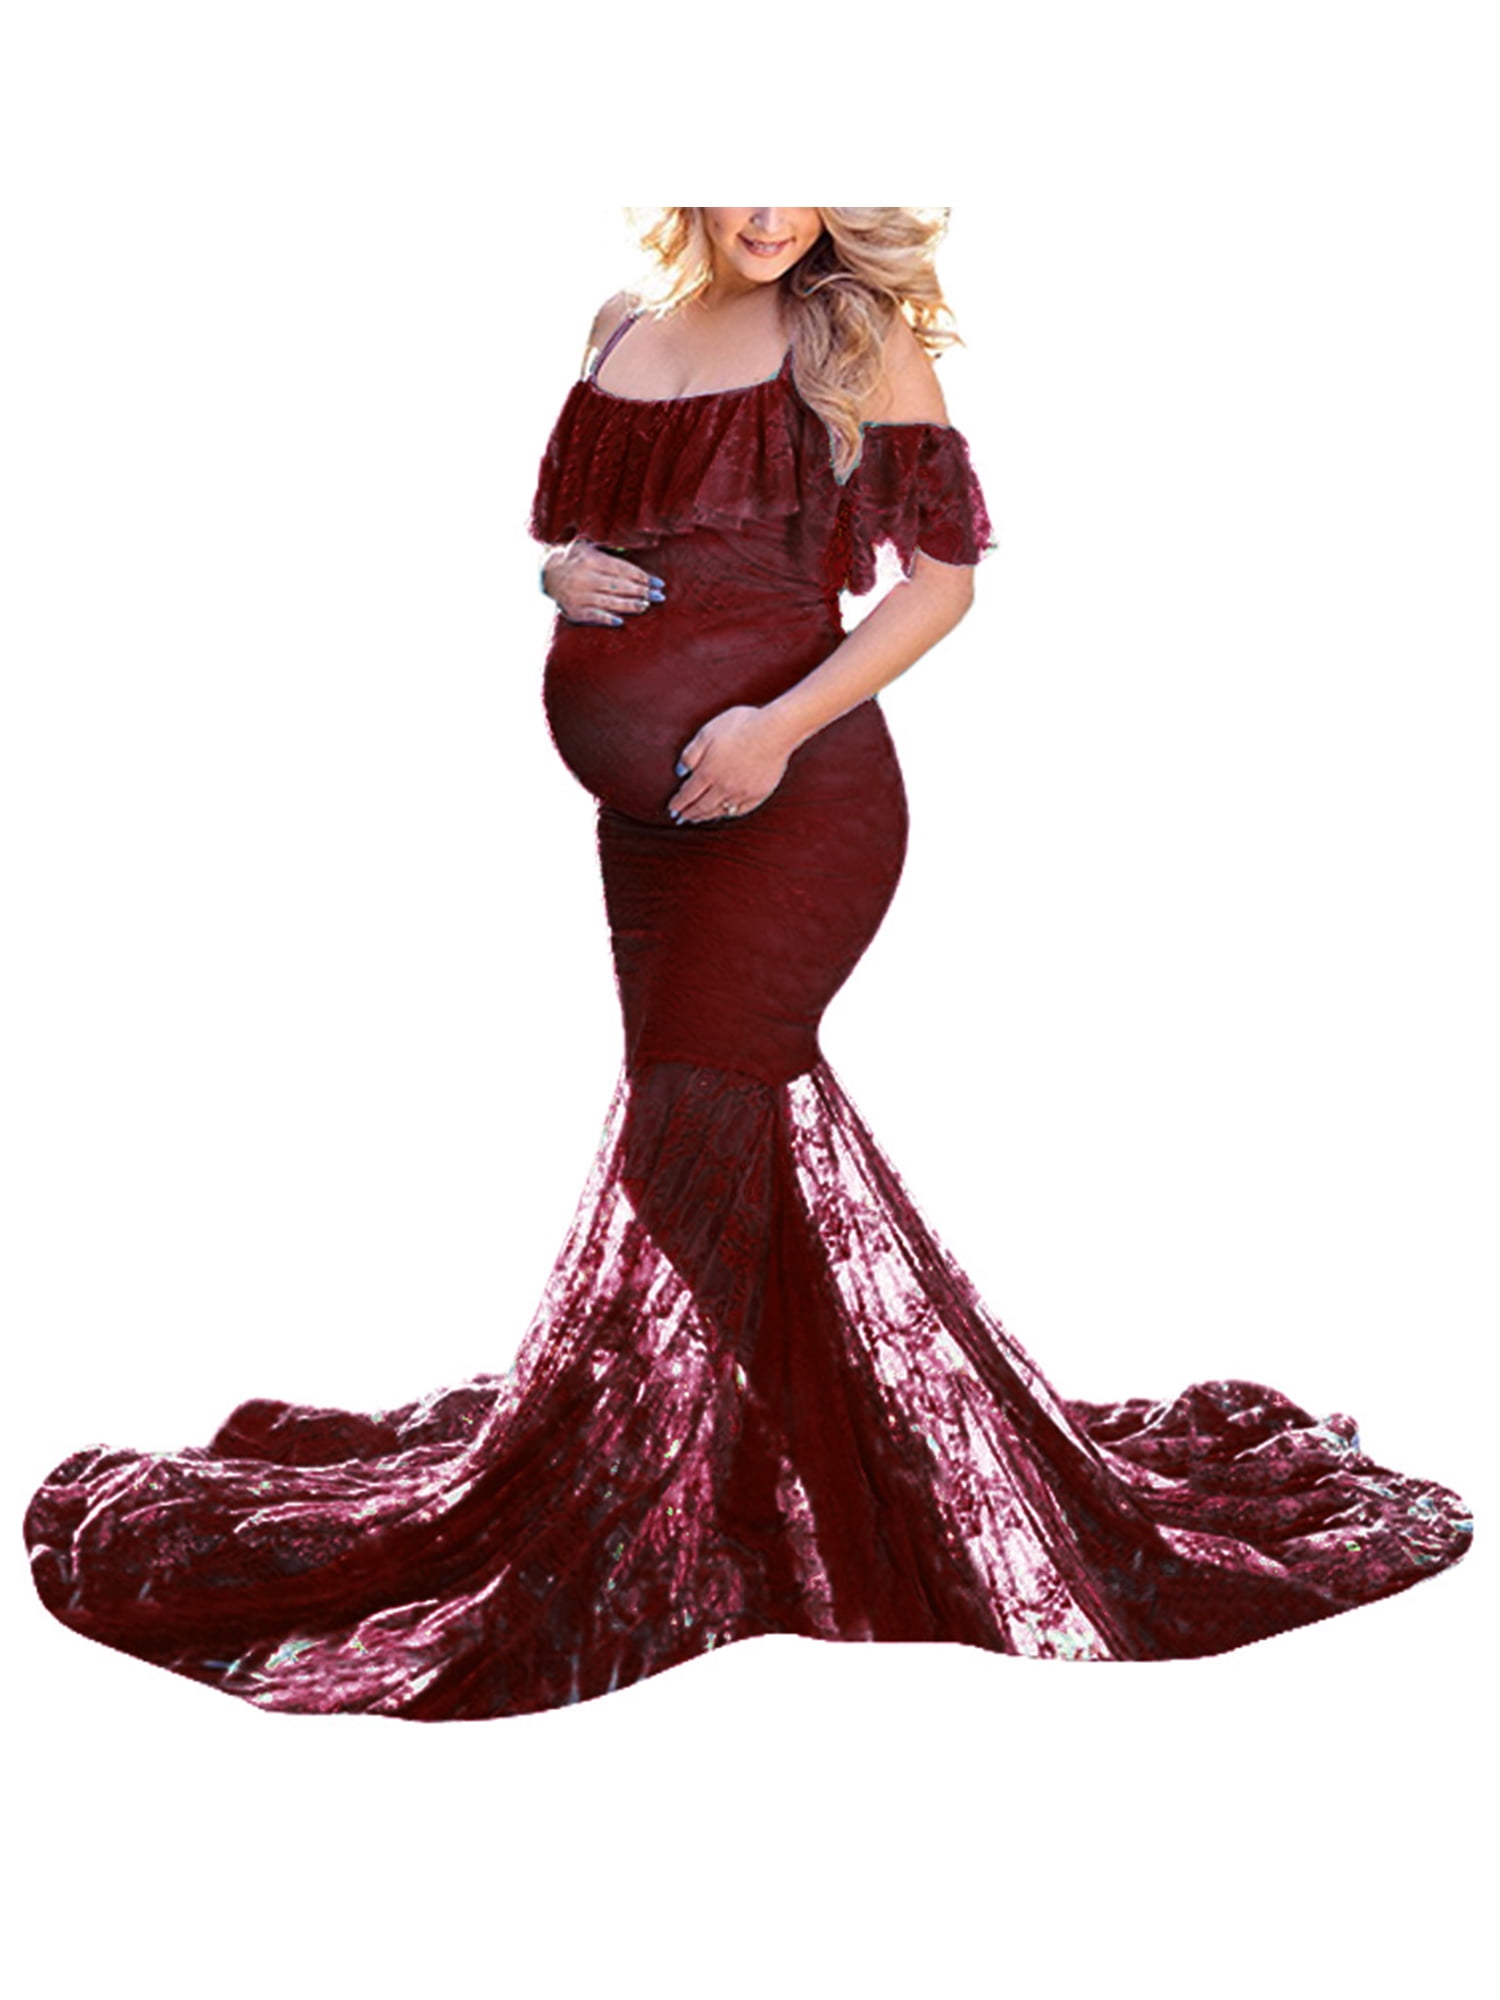 MAWCLOS Fitted Lace Maternity Gown Dress Ruffle Sleeve Sexy Off Shoulder Photography Dress Baby Shower 57a93ef0 3e0b 42e1 8ef5 e17dcc624f6b.94f3cb3f006678d1a7c590ad77a542a7